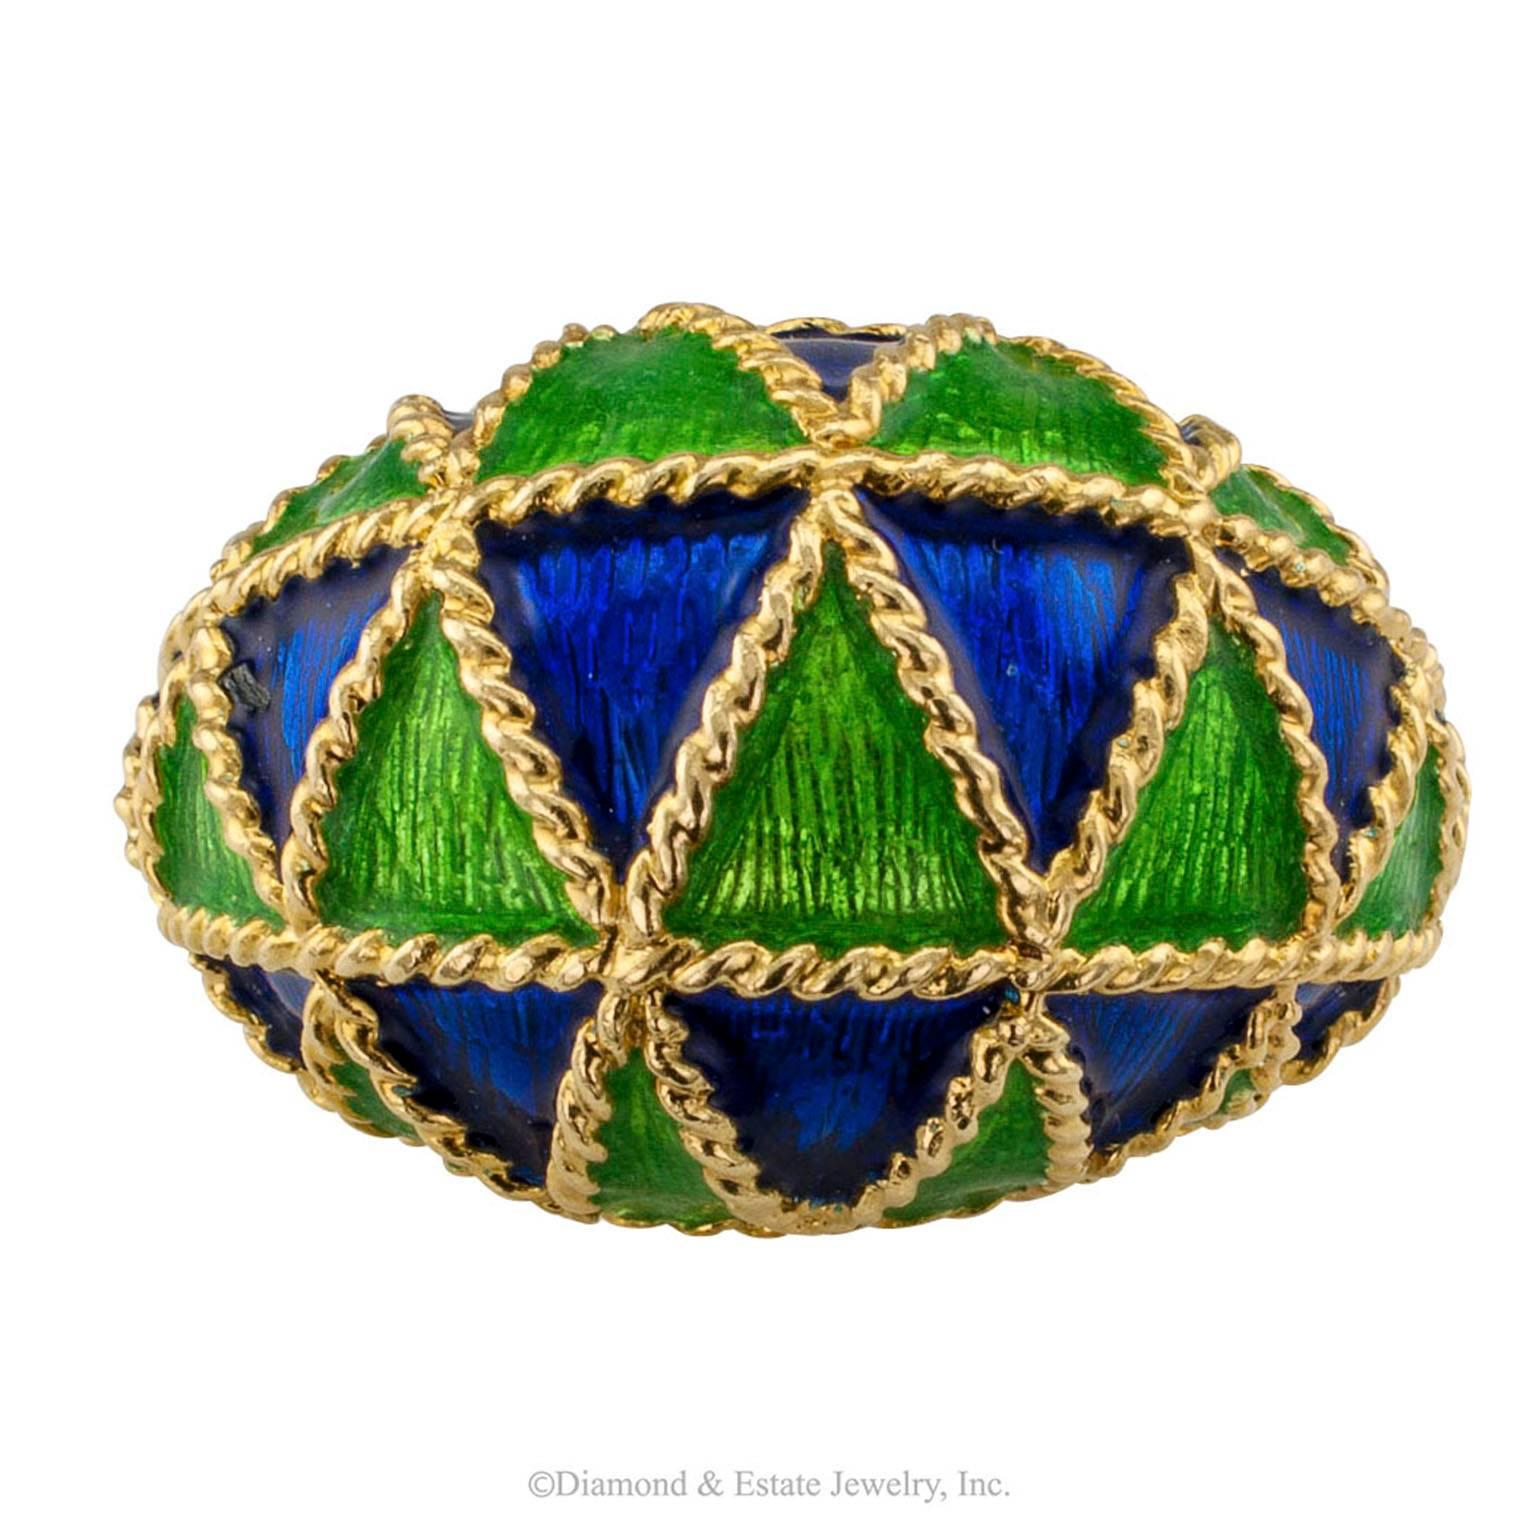 Contemporary 1970s Domed Gold Ring with Blue and Green Enamel